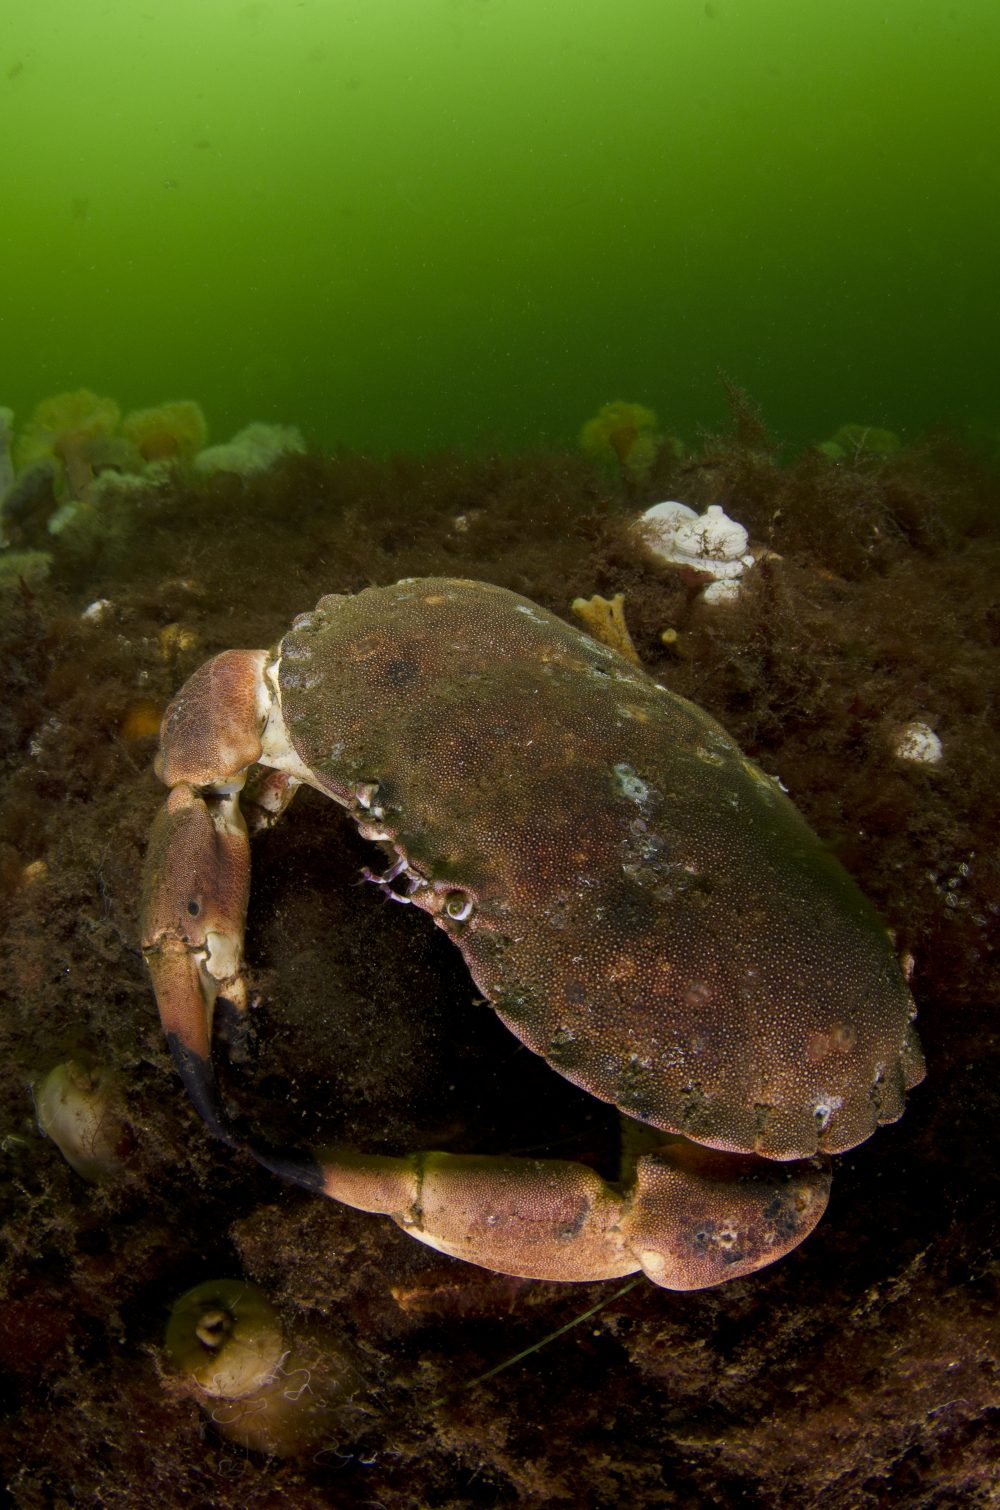 An edible crab (Cancer pagurus) on the seabed of a Scottish sealoch, with anemones in the background. Loch Fyne, Argyll and Bute, Scotland. British Isles - Photo by Alexander Mustard